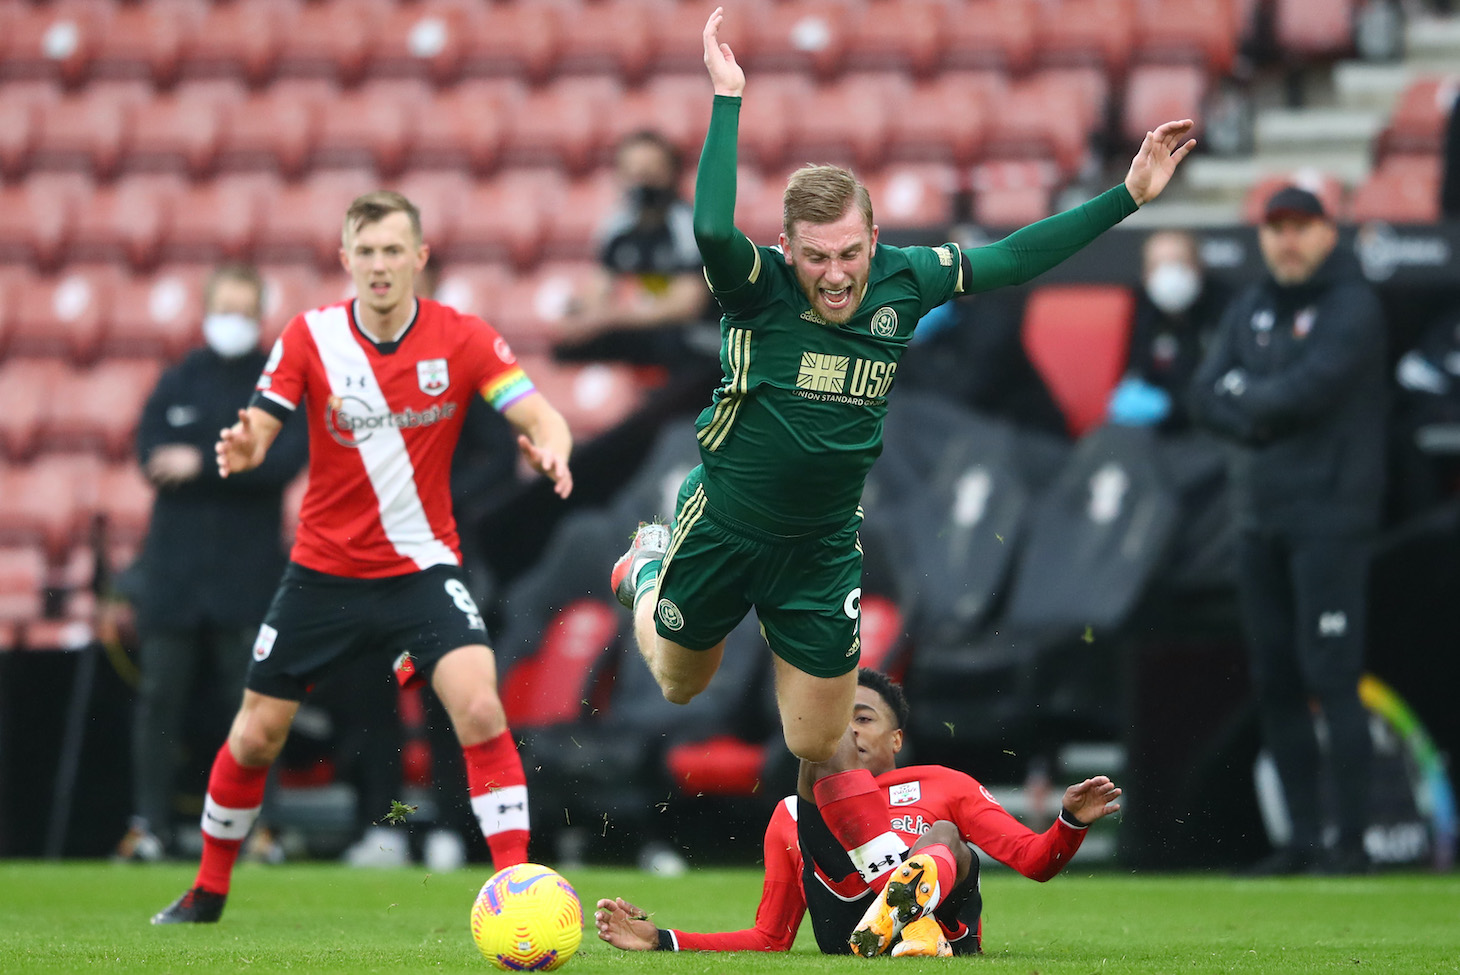 Oliver McBurnie of Sheffield United is fouled by Kyle Walker-Peters of Southampton during the Premier League match between Southampton and Sheffield United at St Mary's Stadium on December 13, 2020 in Southampton, England. A limited number of spectators (2000) are welcomed back to stadiums to watch elite football across England. This was following easing of restrictions on spectators in tiers one and two areas only.